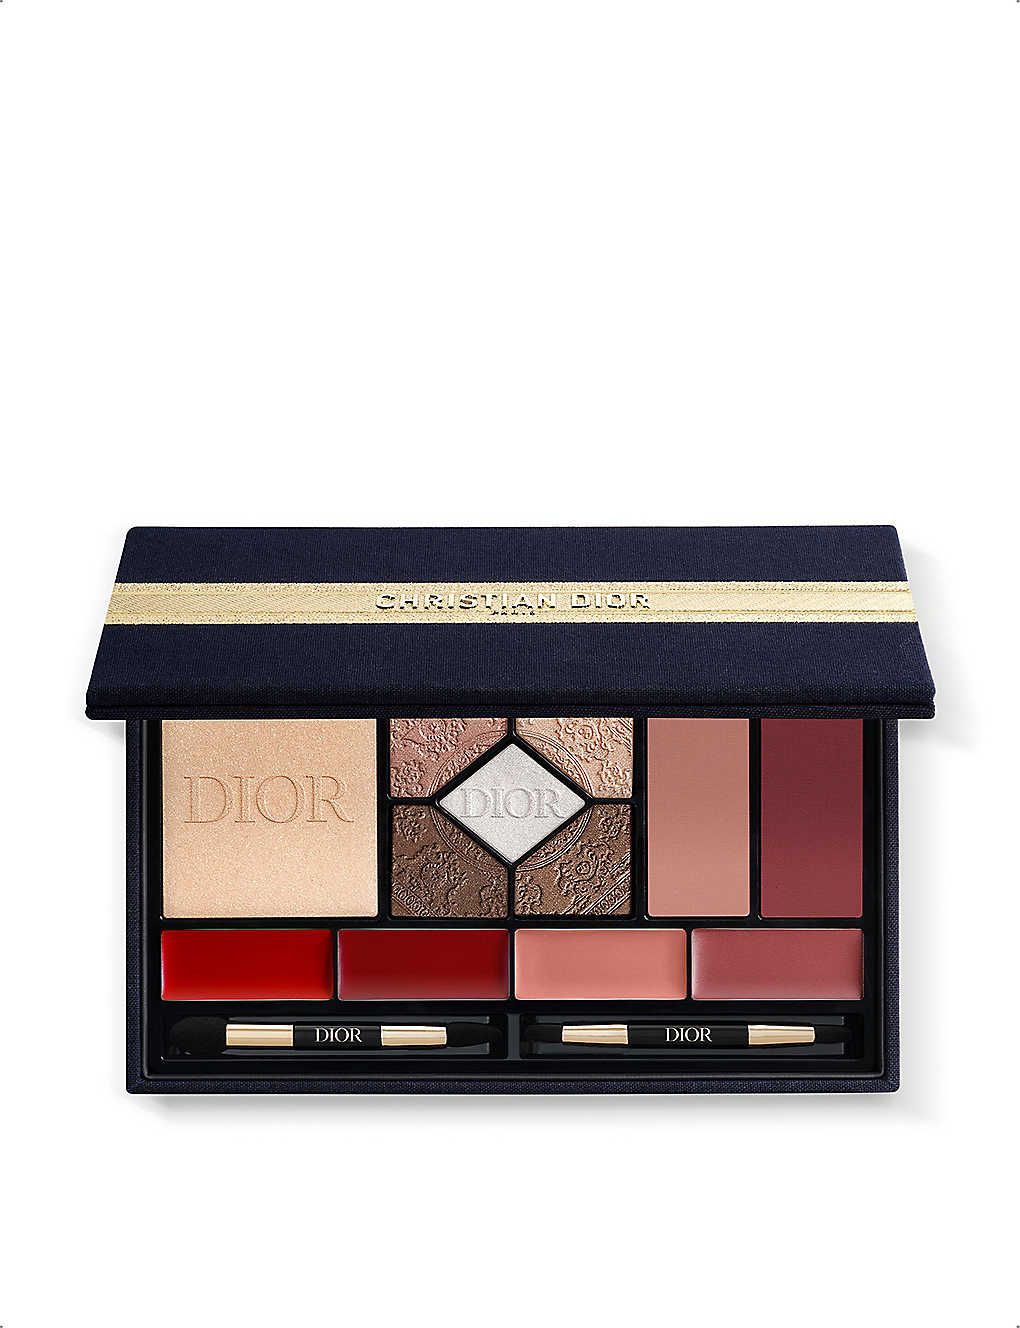 DIOR Écrin Couture Iconic limited-edition make-up palette 9.9g | Selfridges